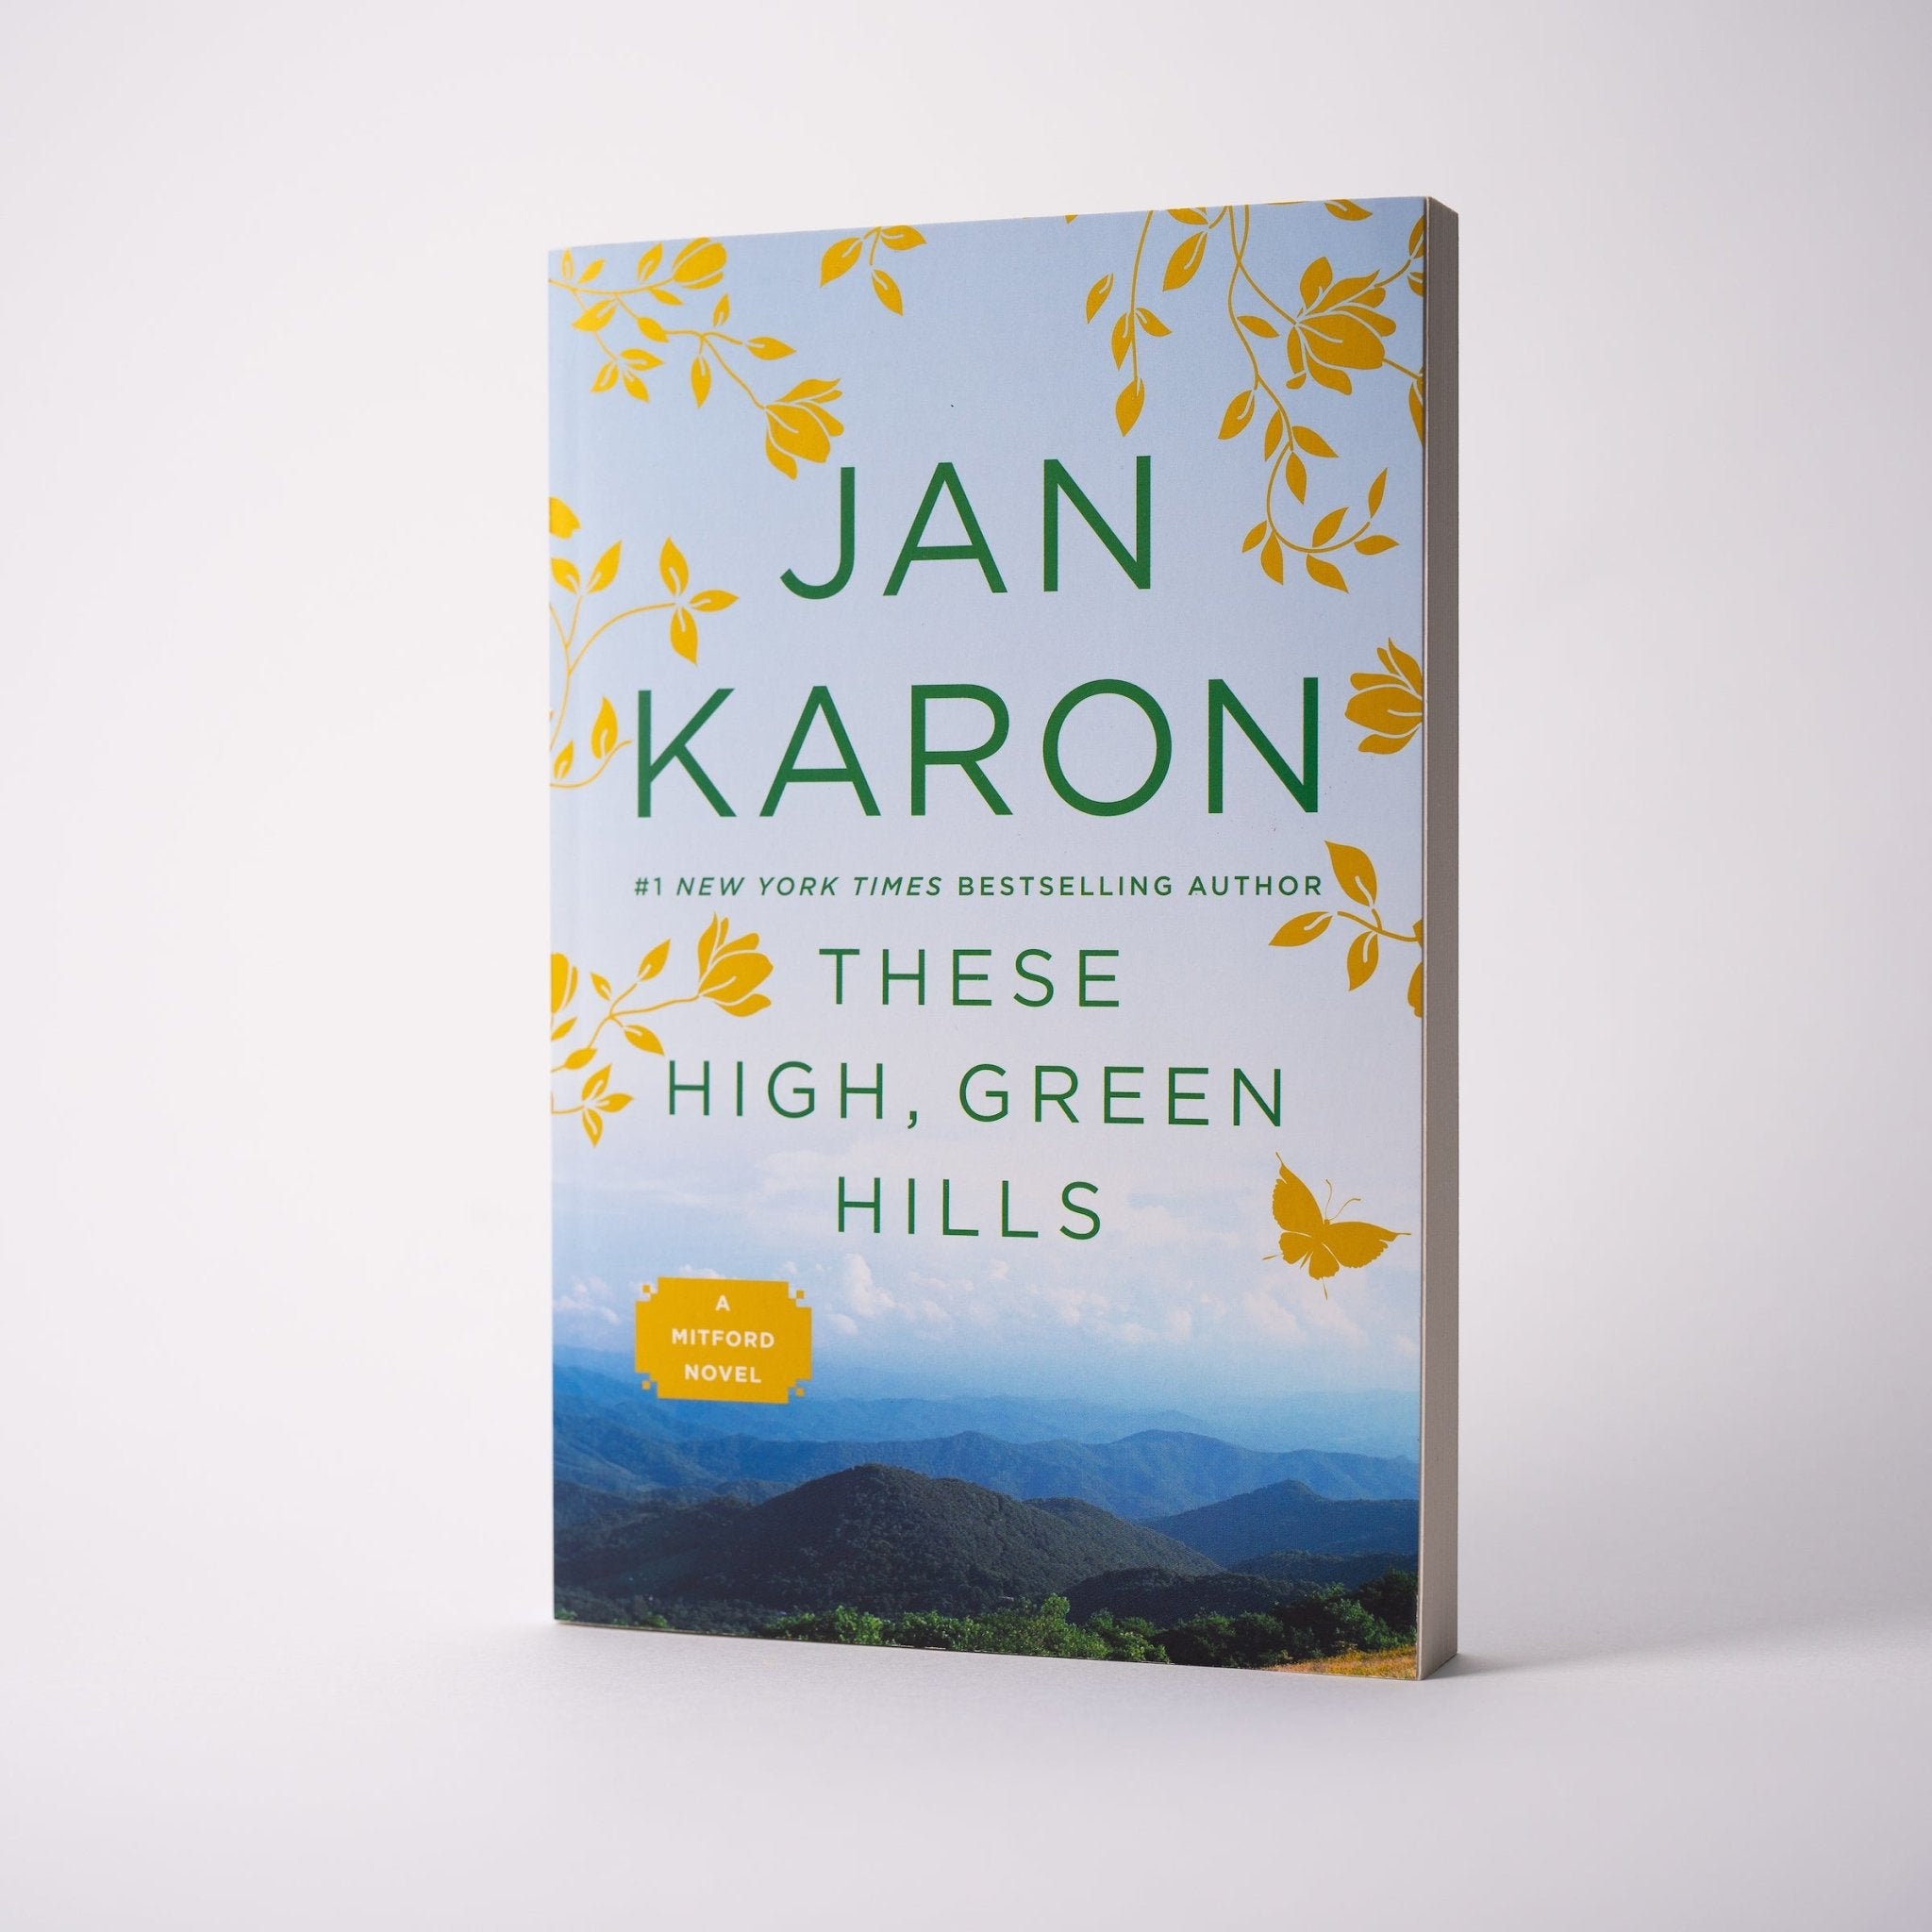 Green　Hills　These　Soaps　High,　Book　Kentucky　Karon:　Such